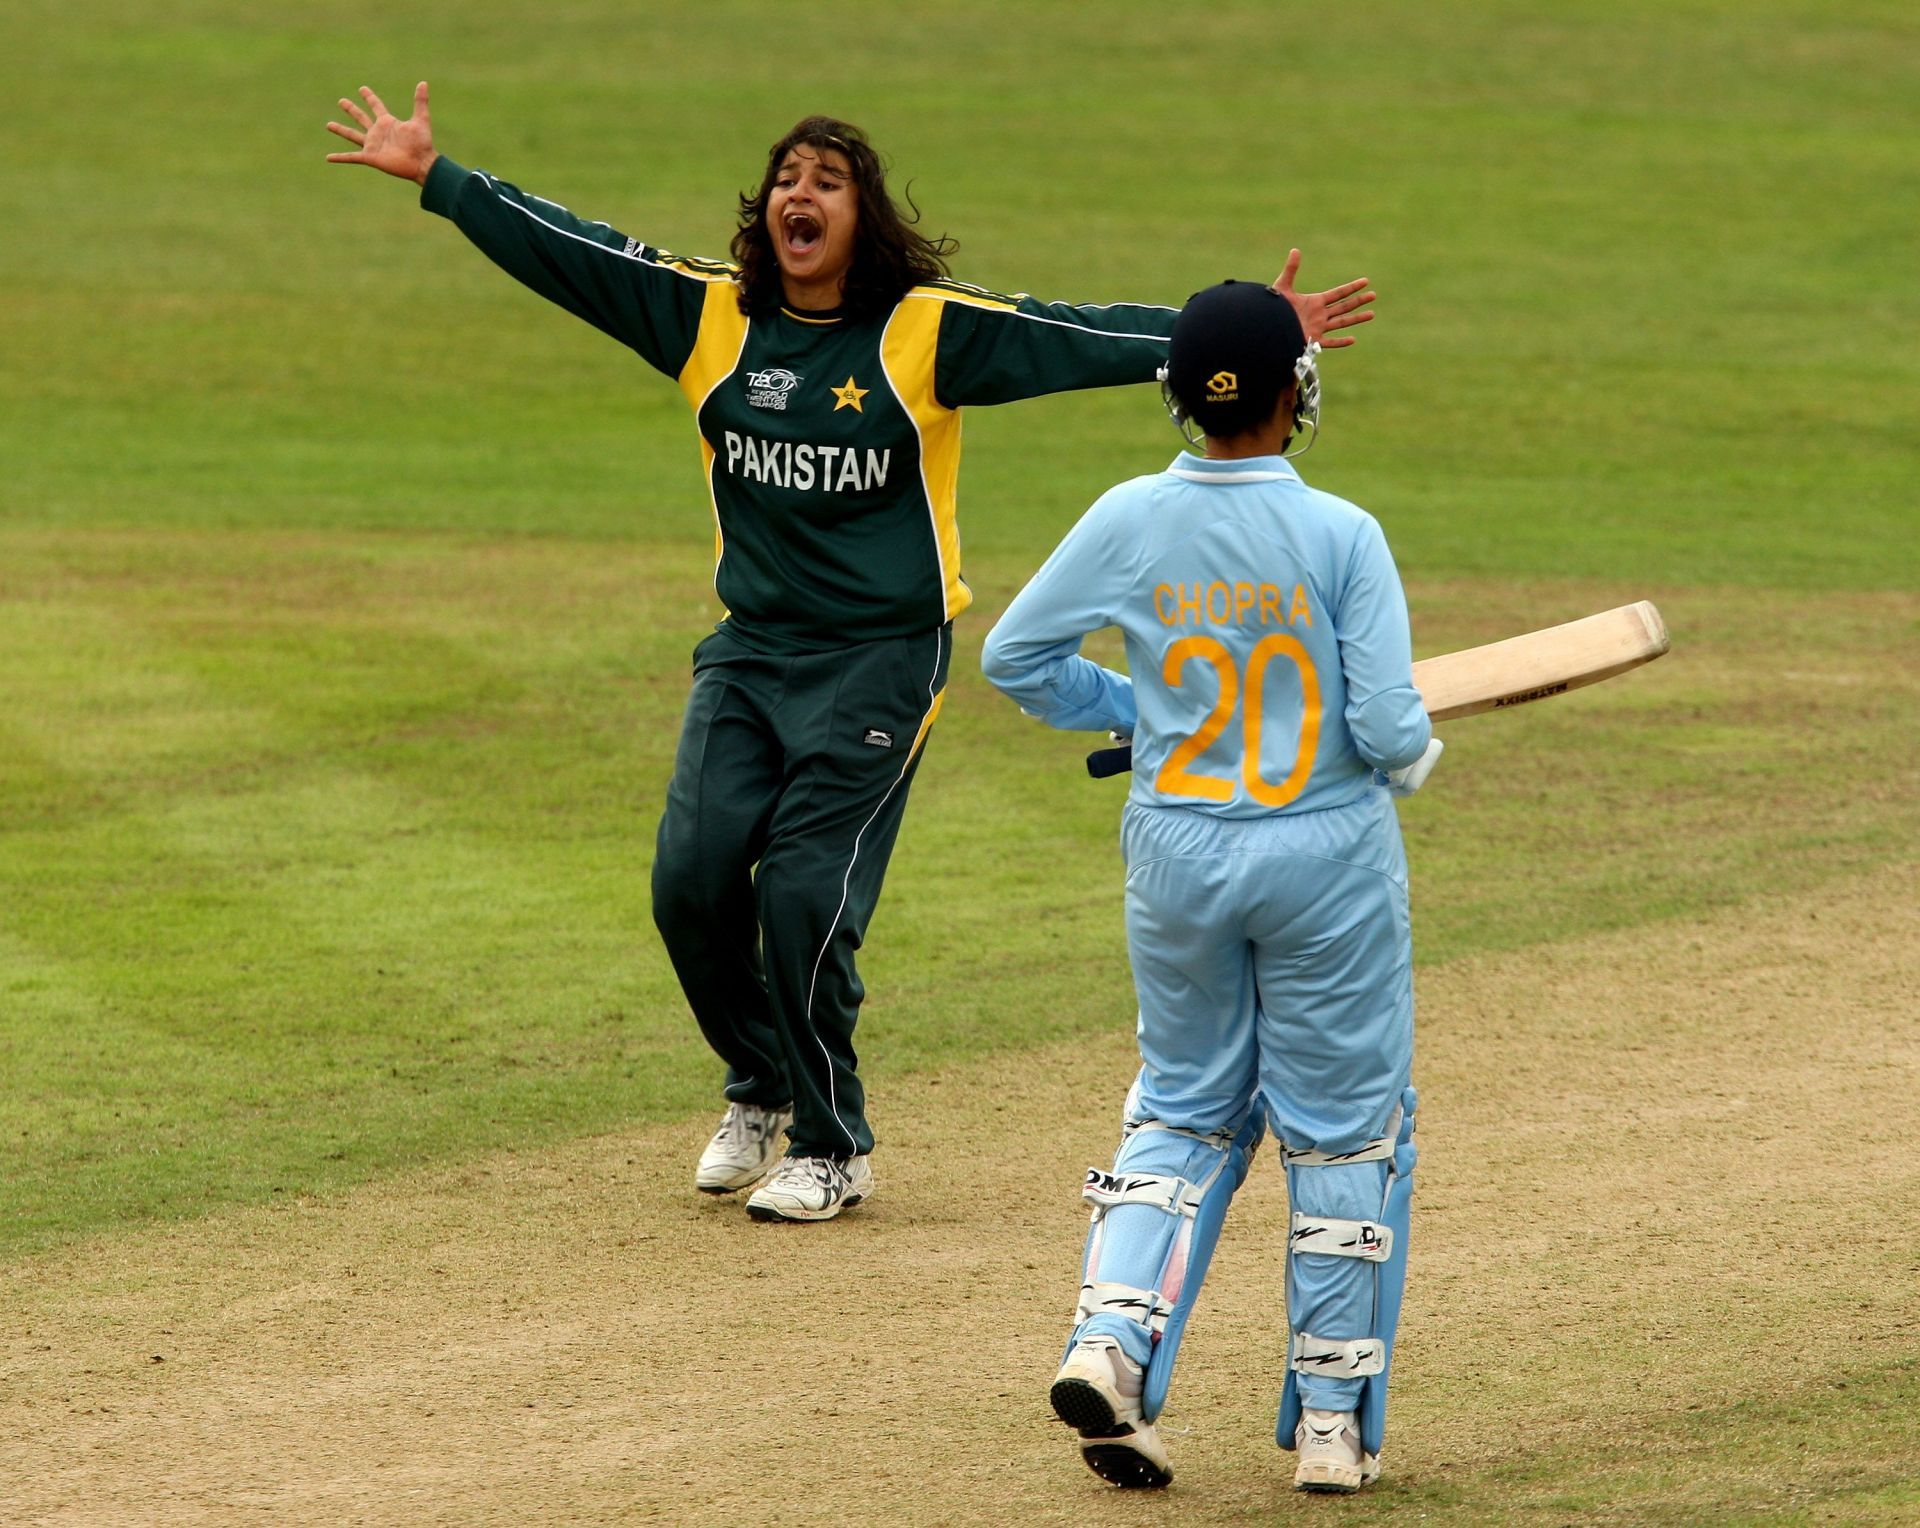 Ind vs Pak matches in Women&#039;s World Cups have produced the same result on all occasions - an Indian win